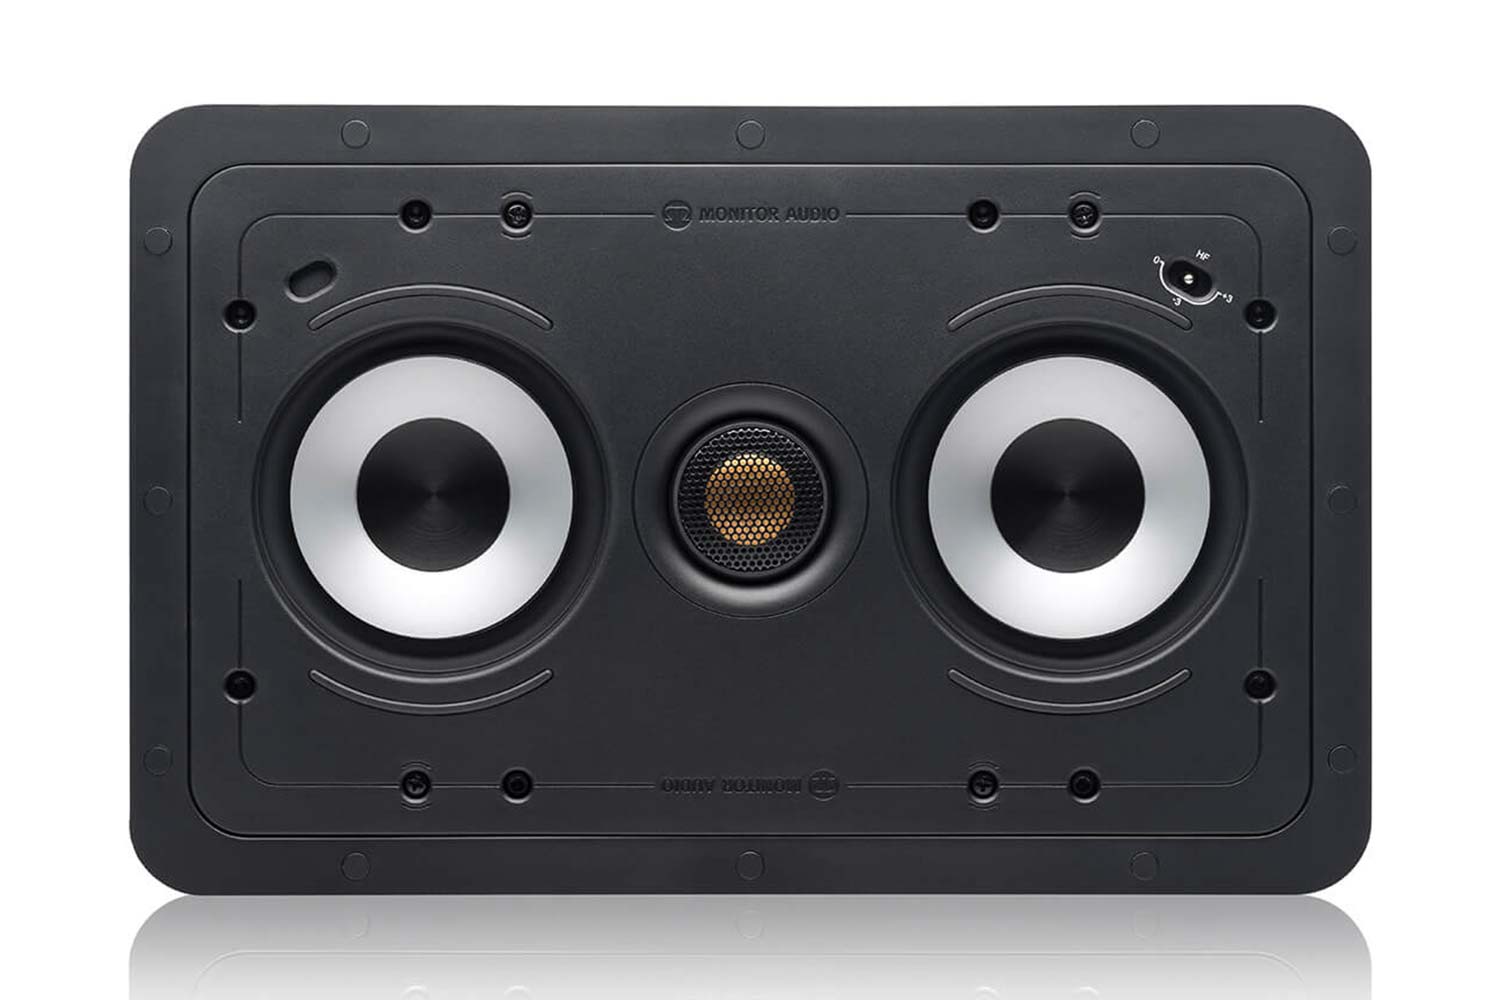 /upload/images/product/produkt_galerie/Monitor_audio_lautsprecher_cp_wt140lcr_front.jpg